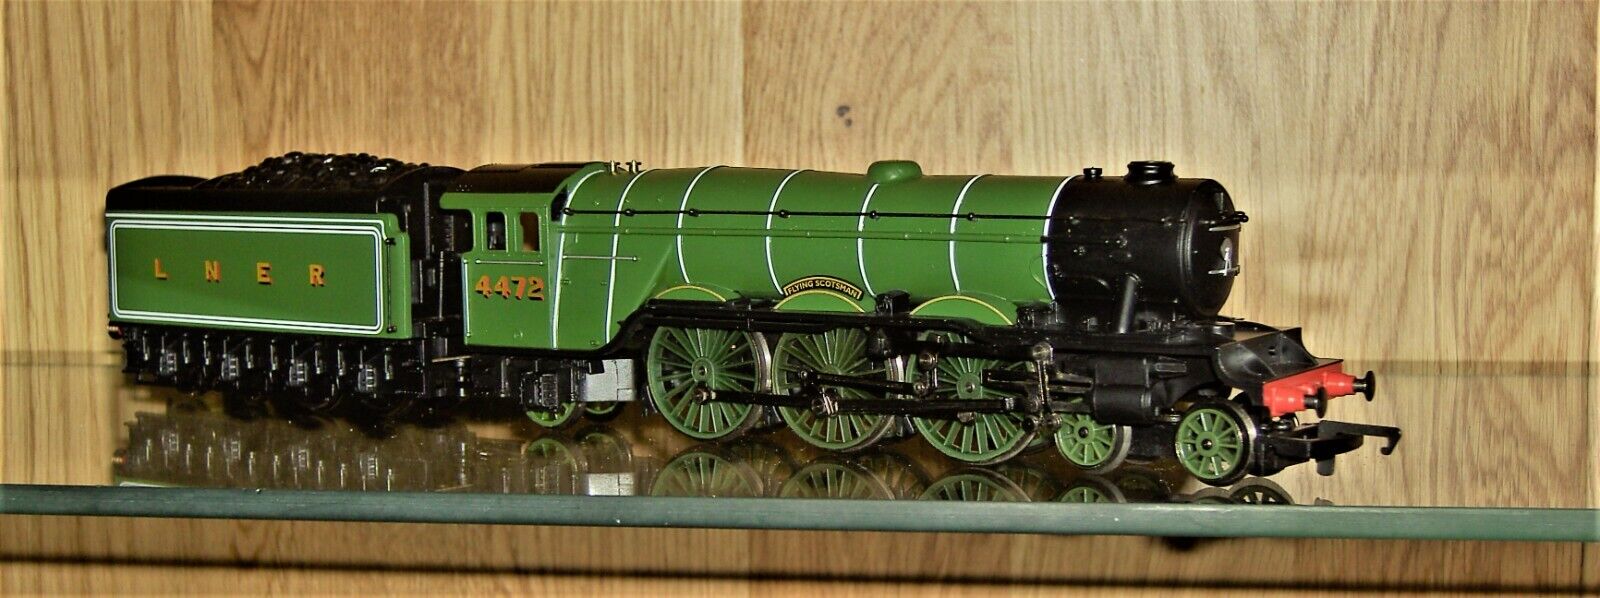 UNUSED HORNBY OO SUPER DETAIL LNER CLASS A1 PACIFIC LOCO FLYING SCOTSMAN (L133) GORĄCO, tanio